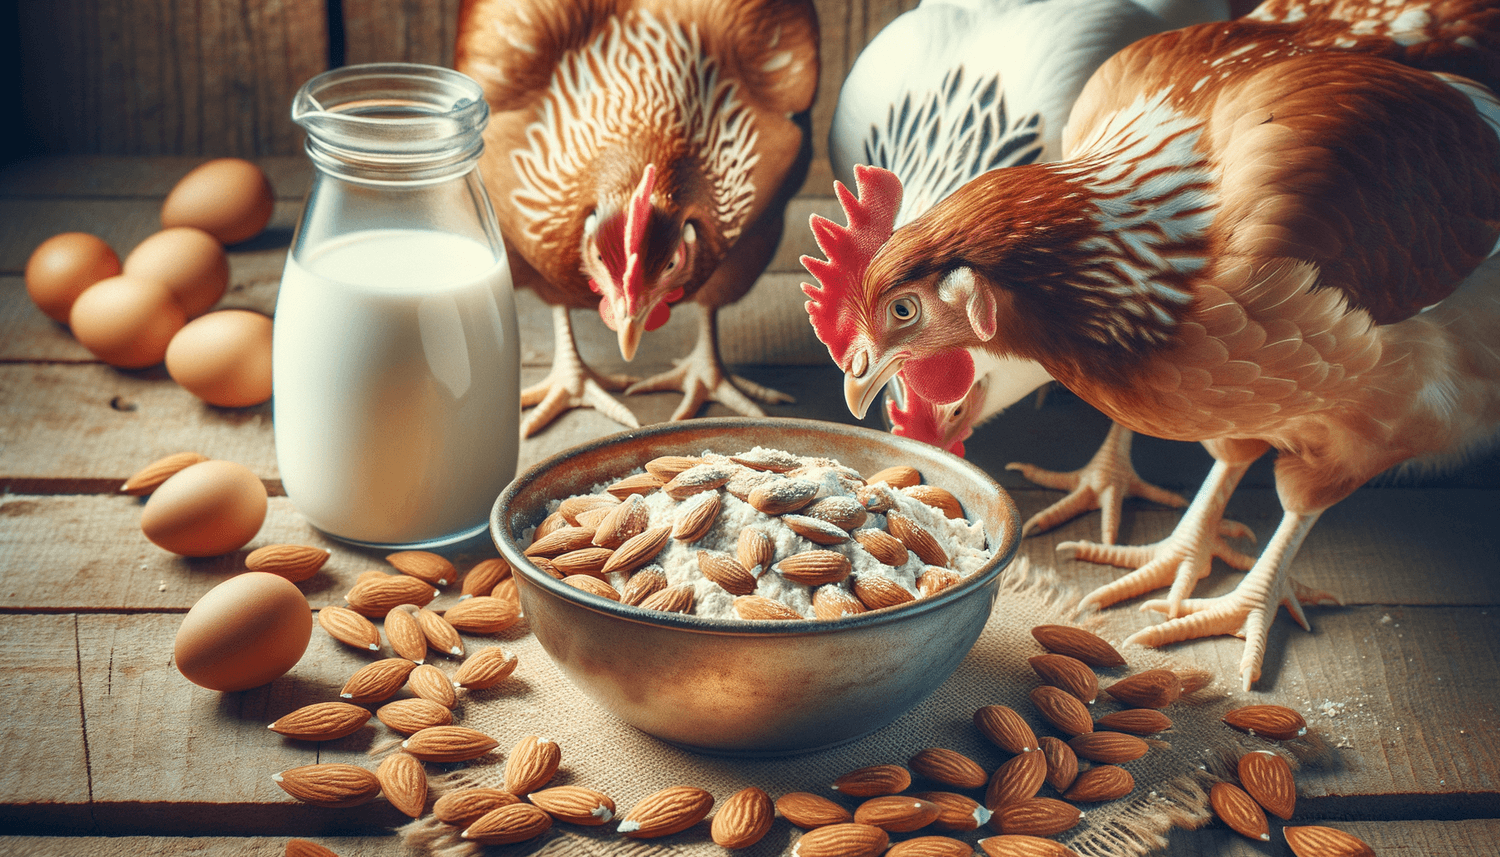 Can Chickens Eat Almond Flour?